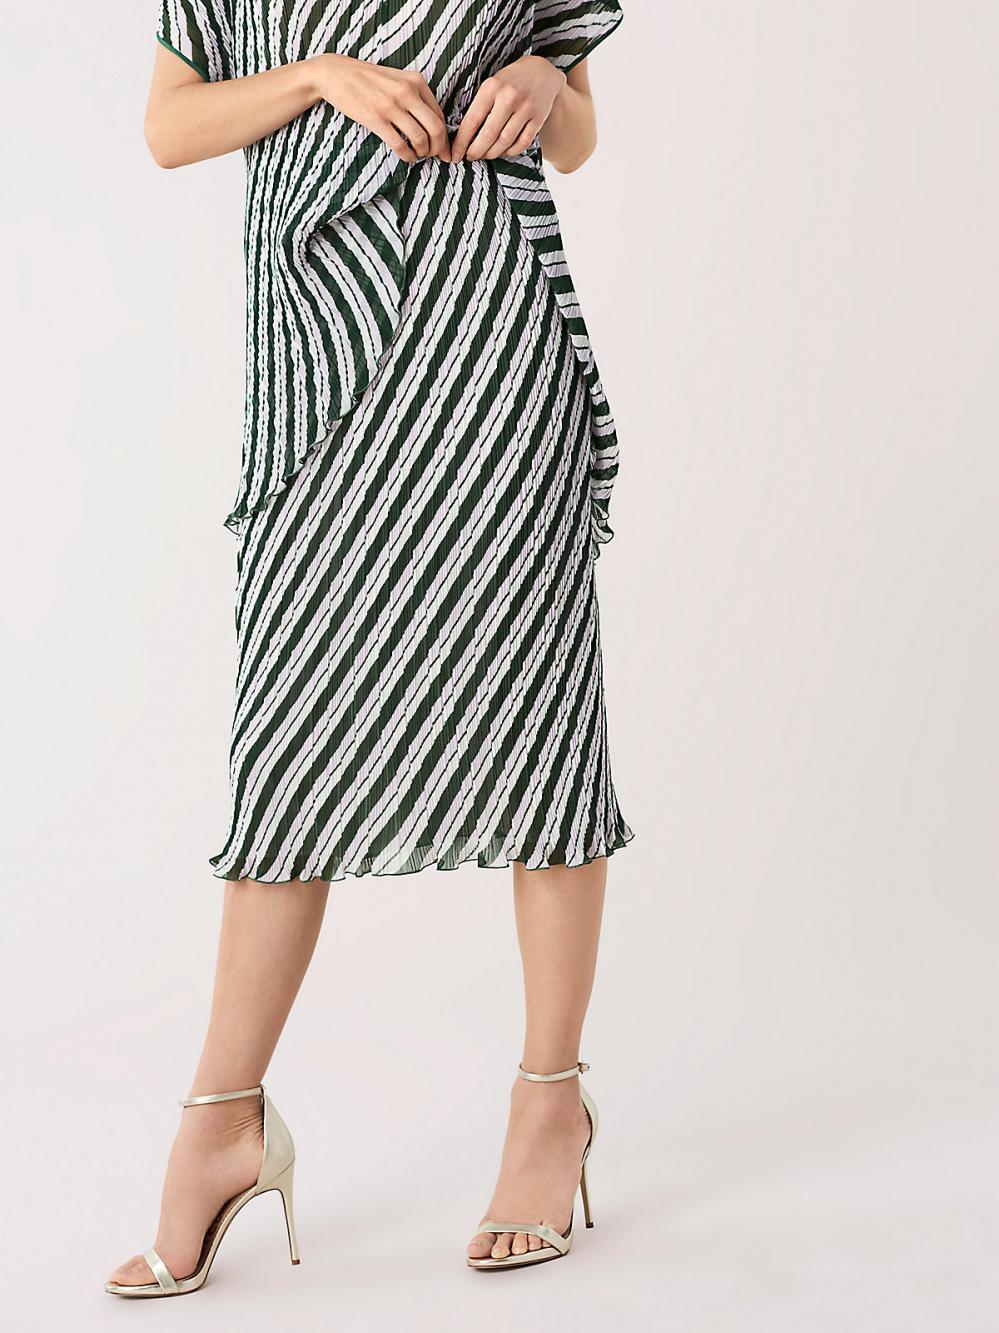 Skirts · Cheap DVF Outlet Store online. · Everyman News